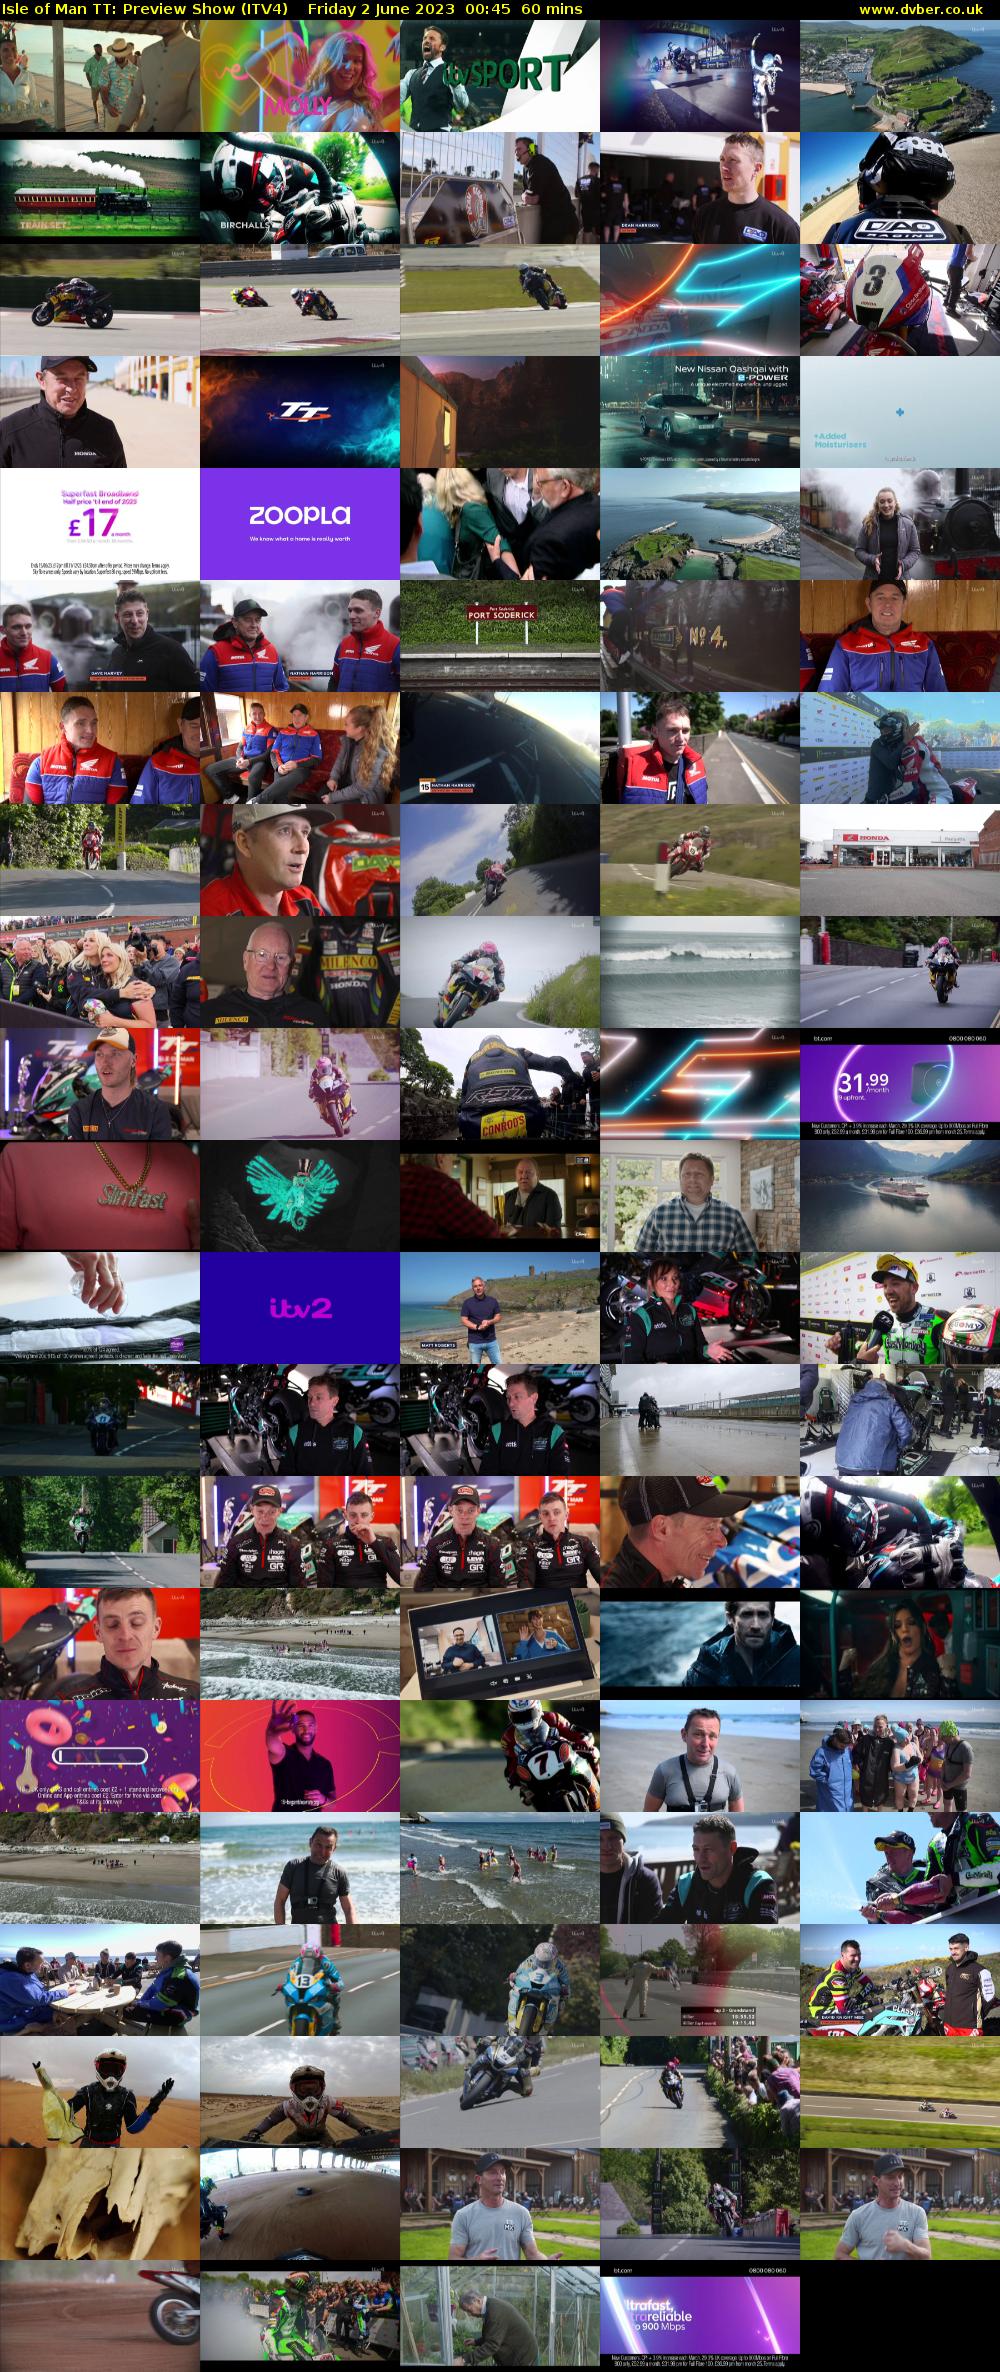 Isle of Man TT: Preview Show (ITV4) Friday 2 June 2023 00:45 - 01:45